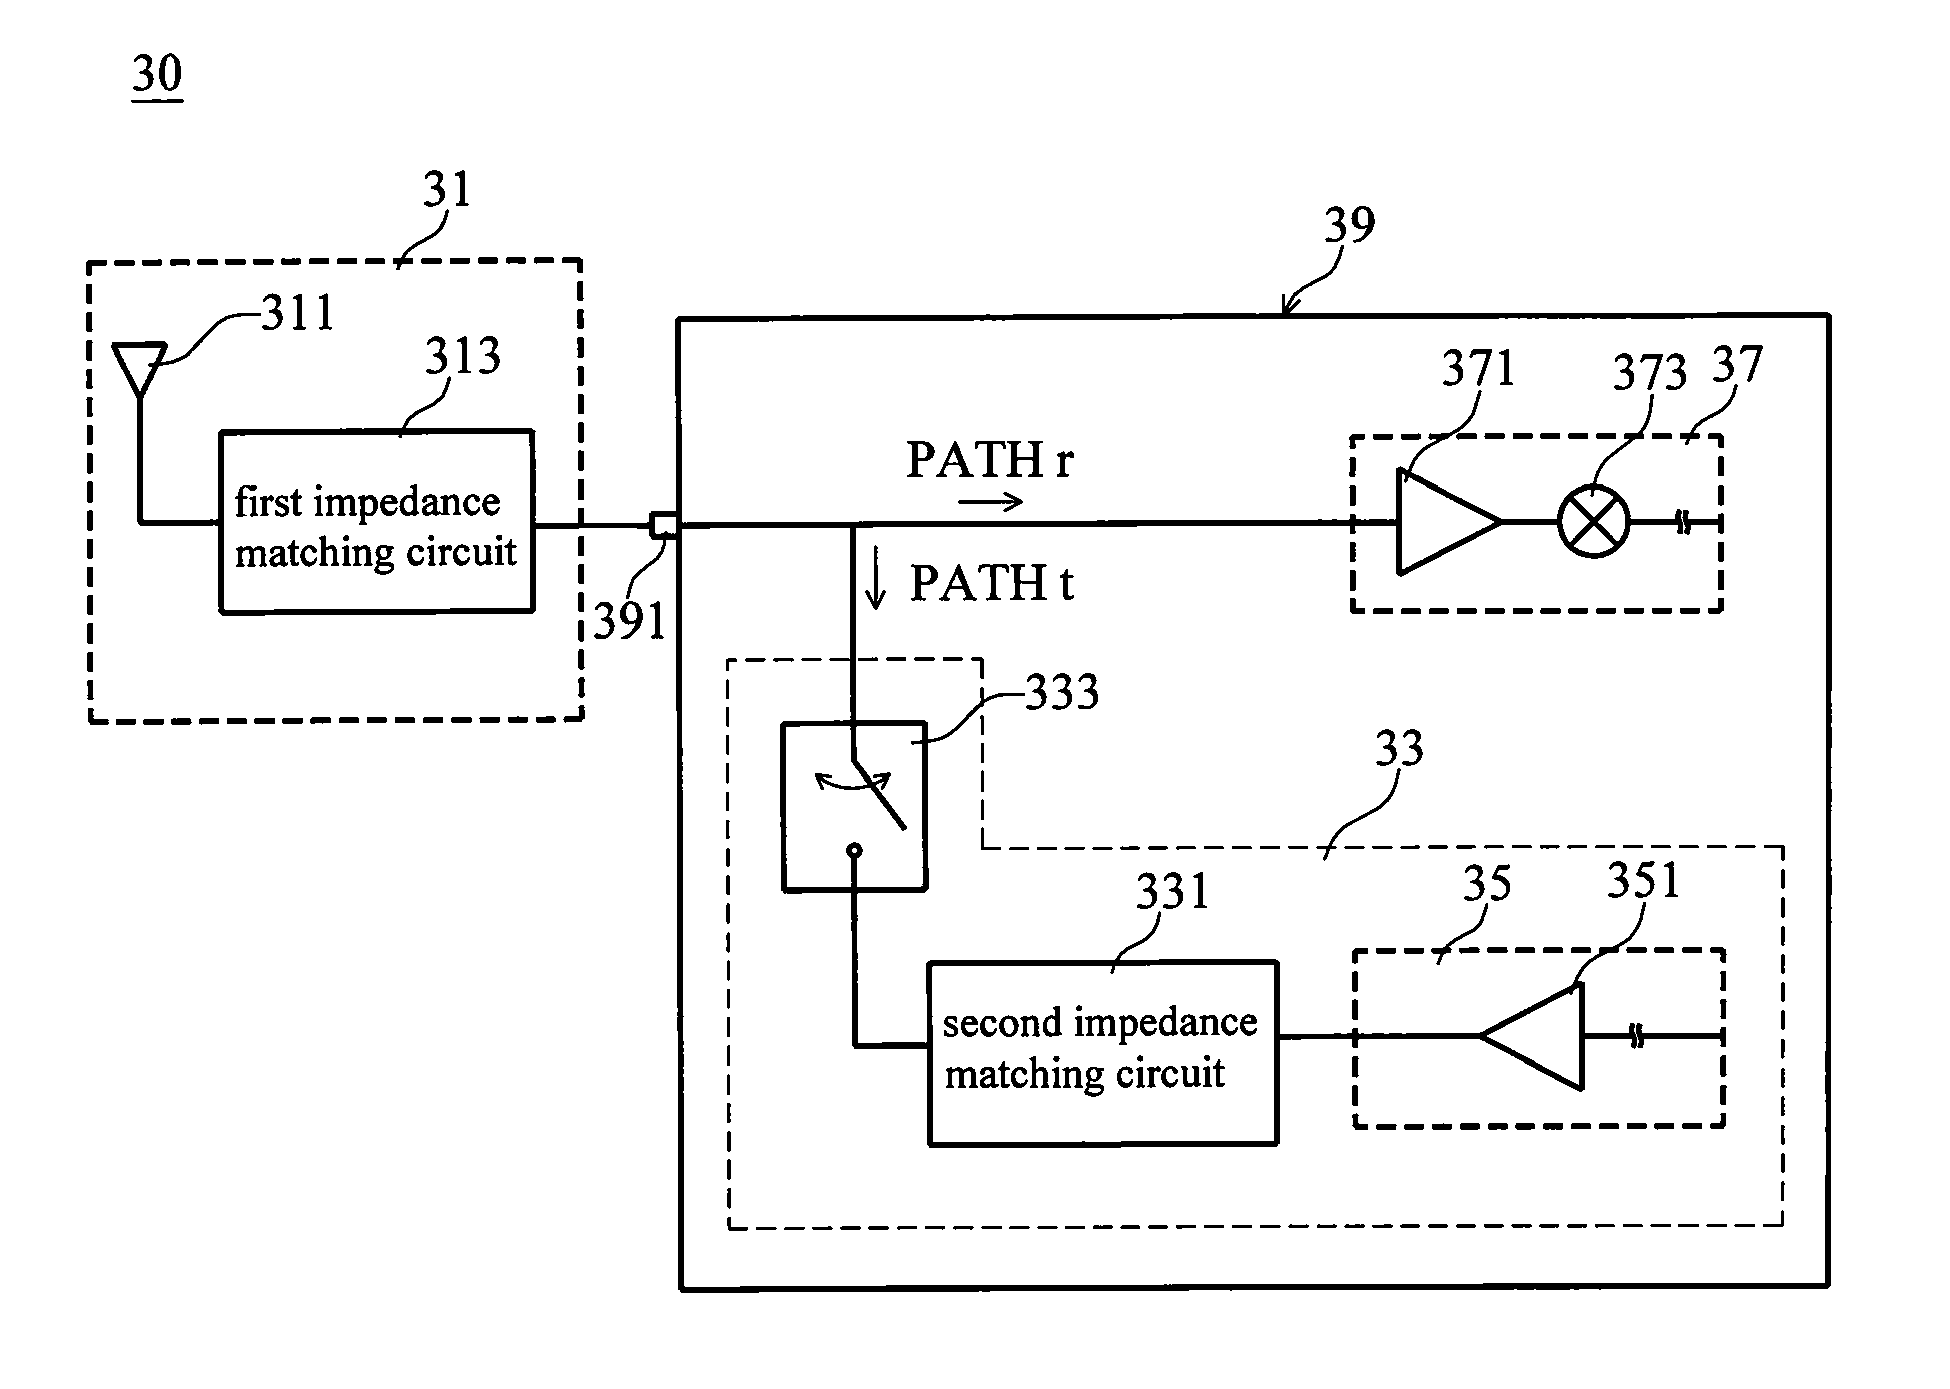 Front-end circuit of the wireless transceiver